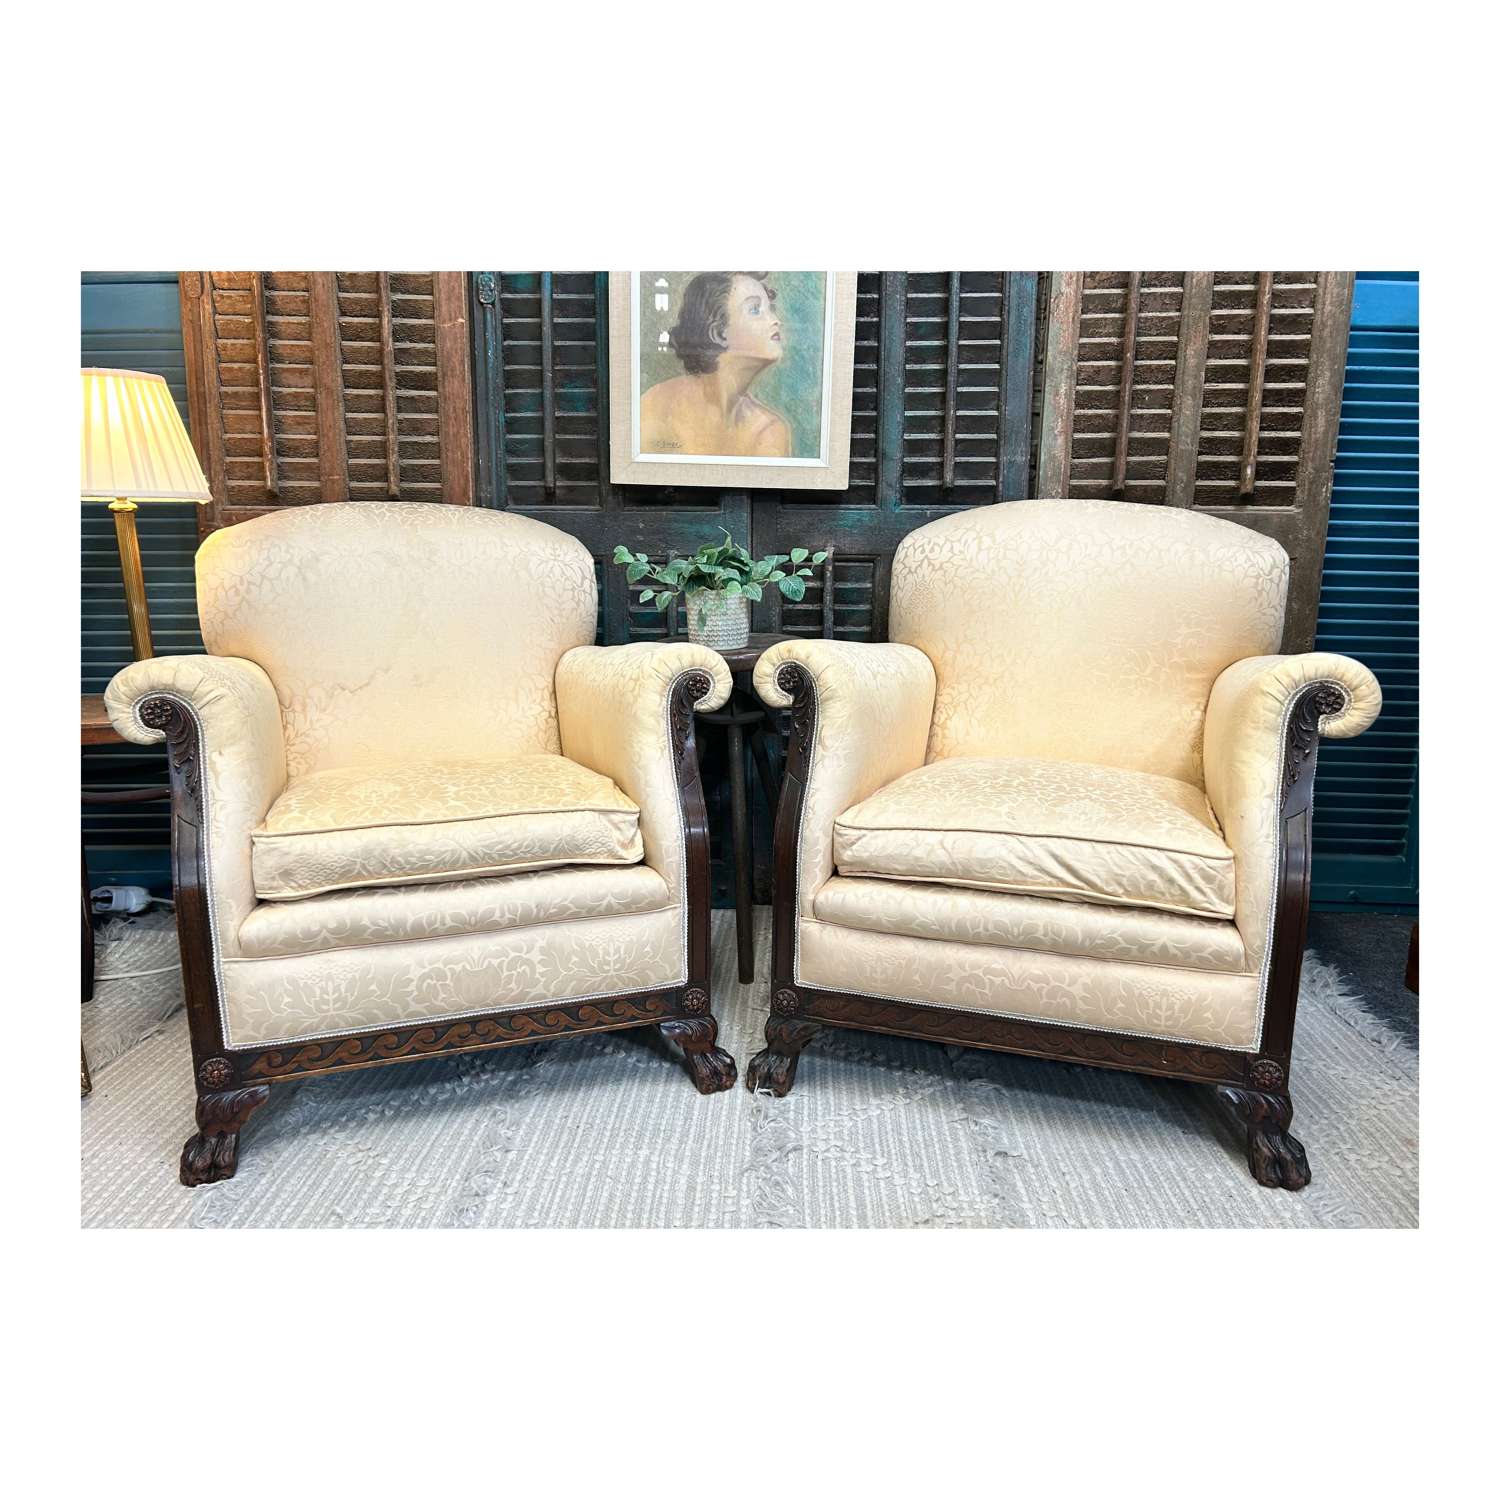 Pair of Art Deco Armchairs with Lions Paw Feet c 1930